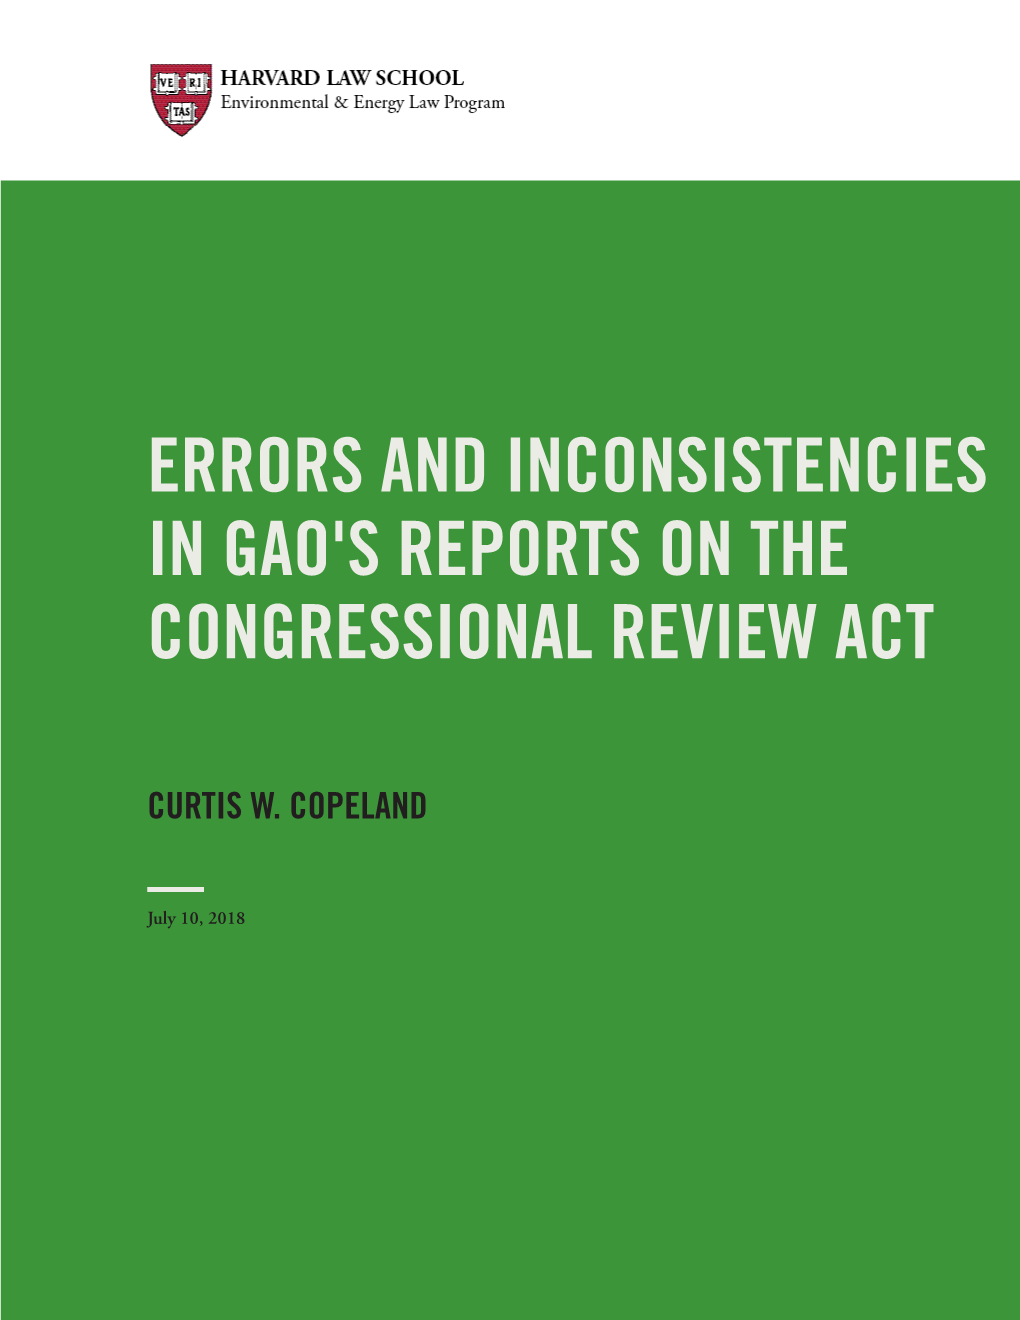 Errors and Inconsistencies in Gao's Reports on the Congressional Review Act